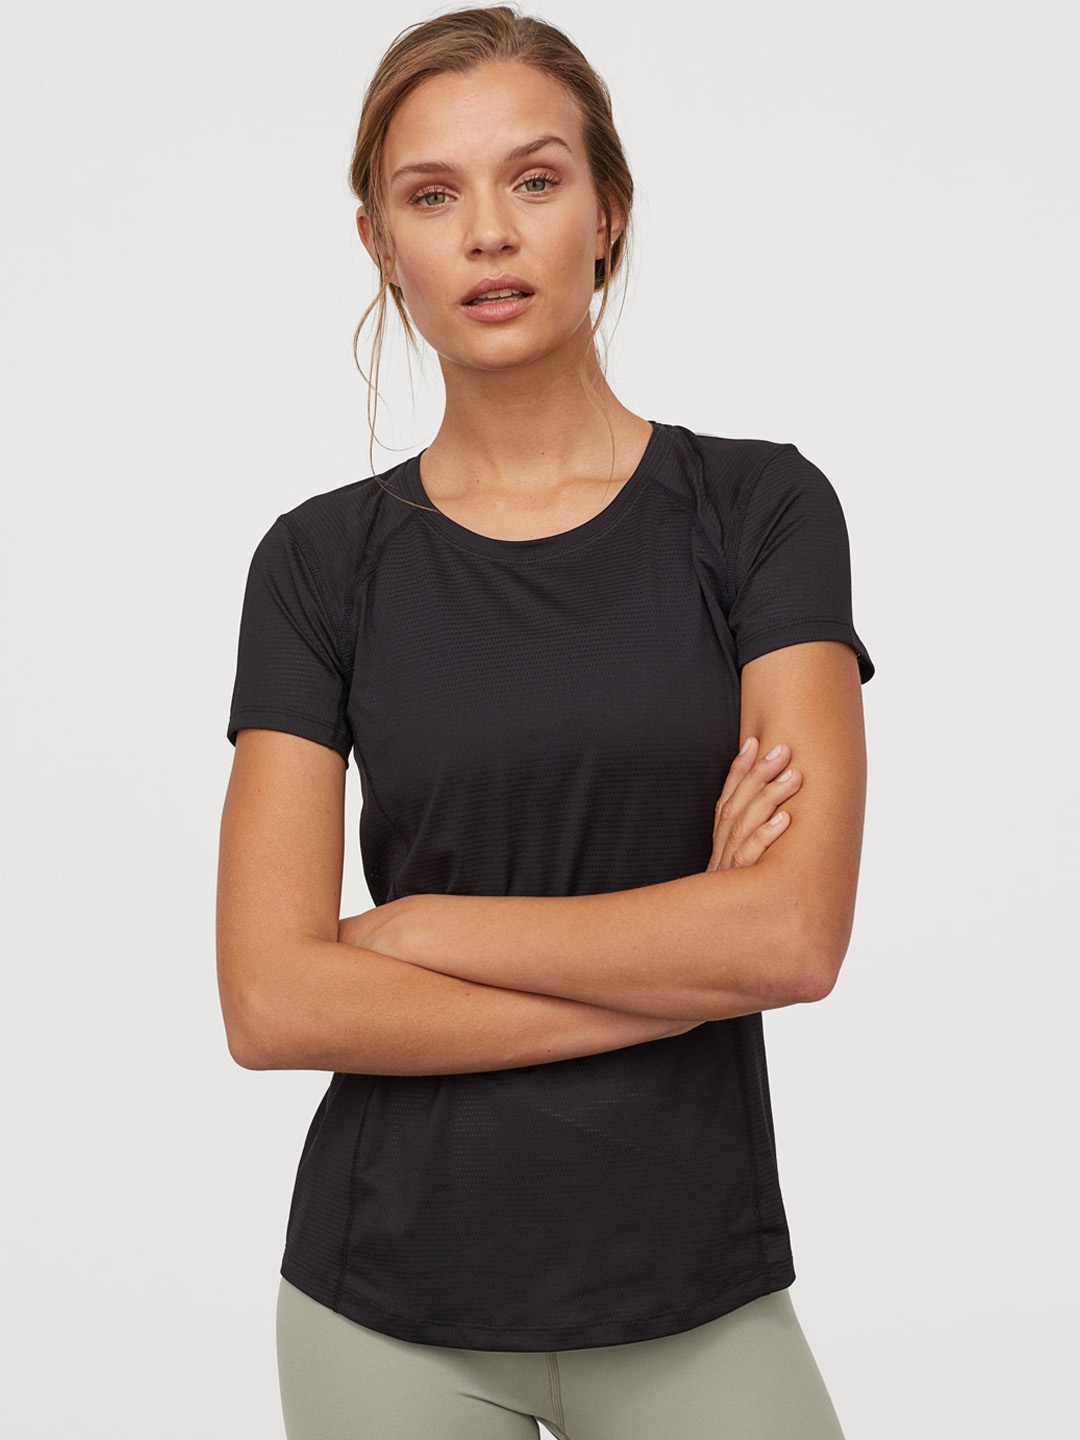 Buy H&M Women Sustainable Sustainable Black Sports Top - Tshirts for ...